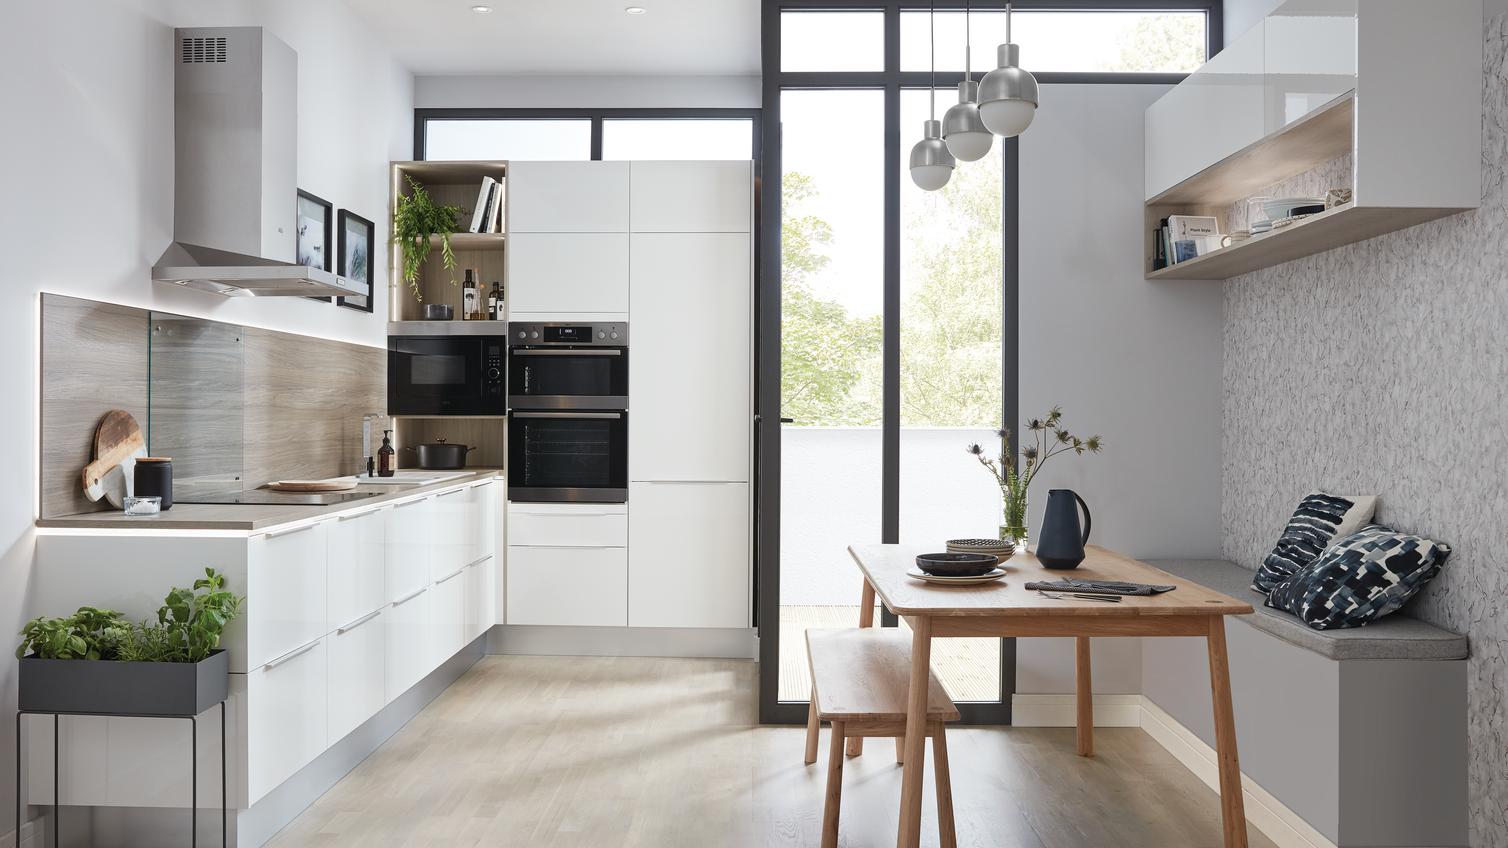 L-shape white gloss kitchen idea using slab kitchen doors. Contains a stainless-steel cooker hood and a black double oven.